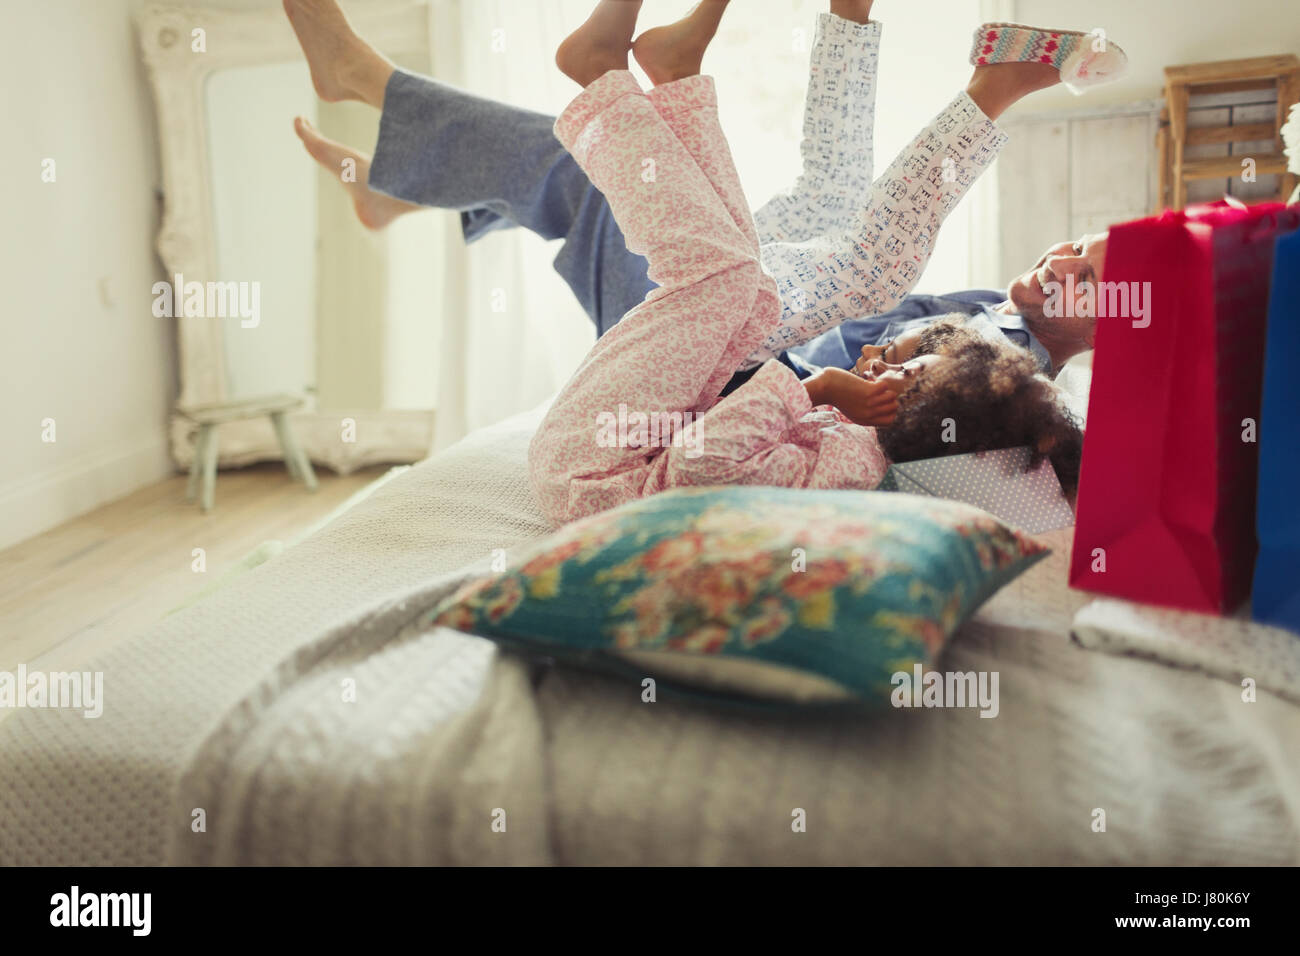 Father and daughters in pajamas kicking legs on bed Stock Photo